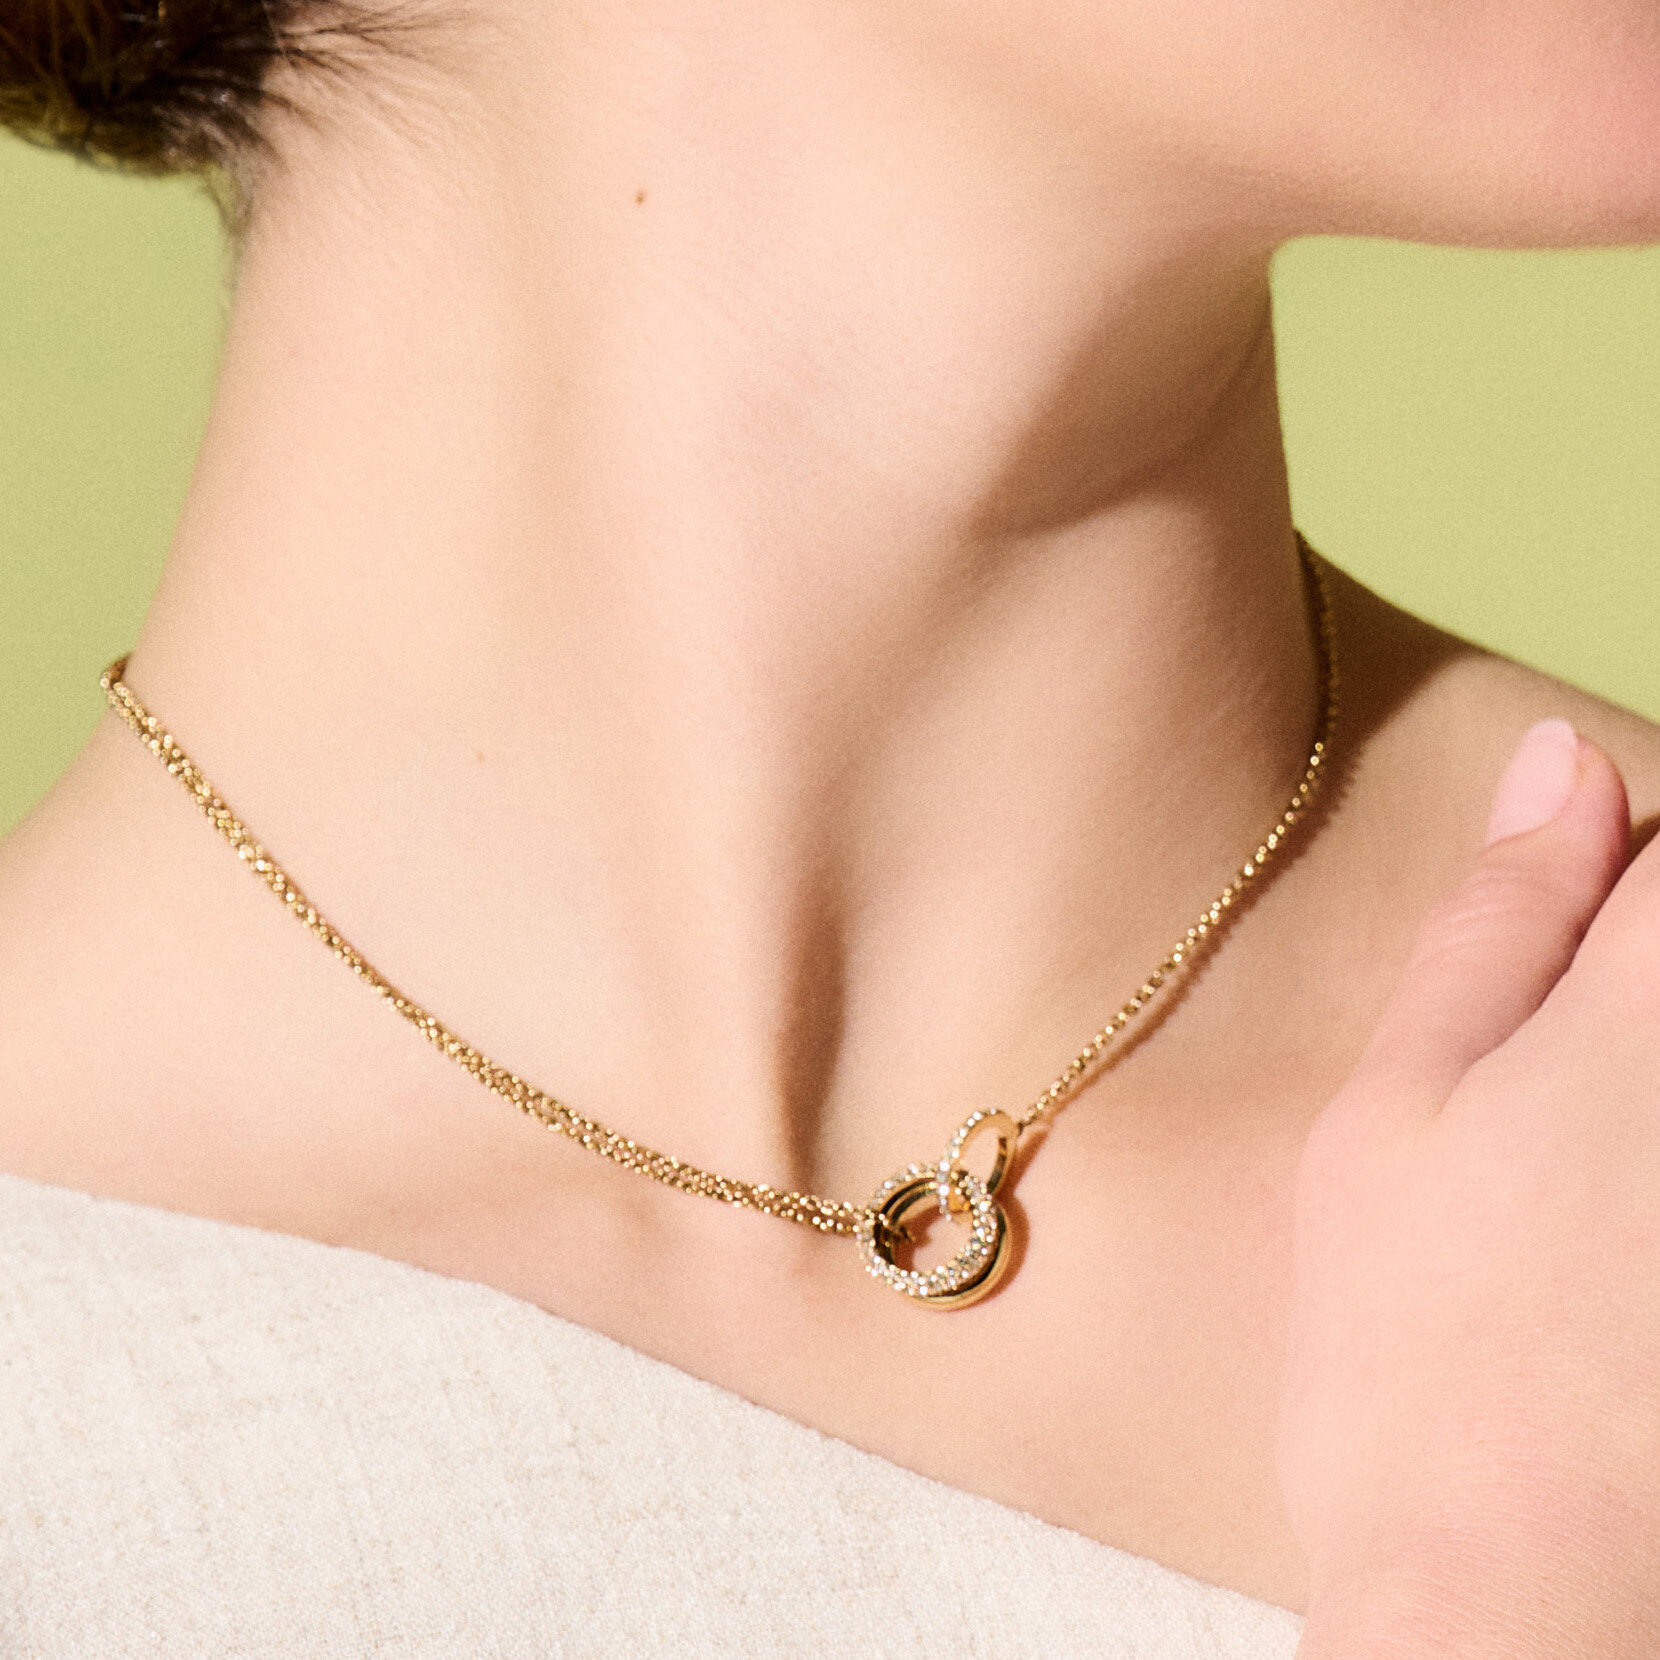 Entwine Gold Necklace